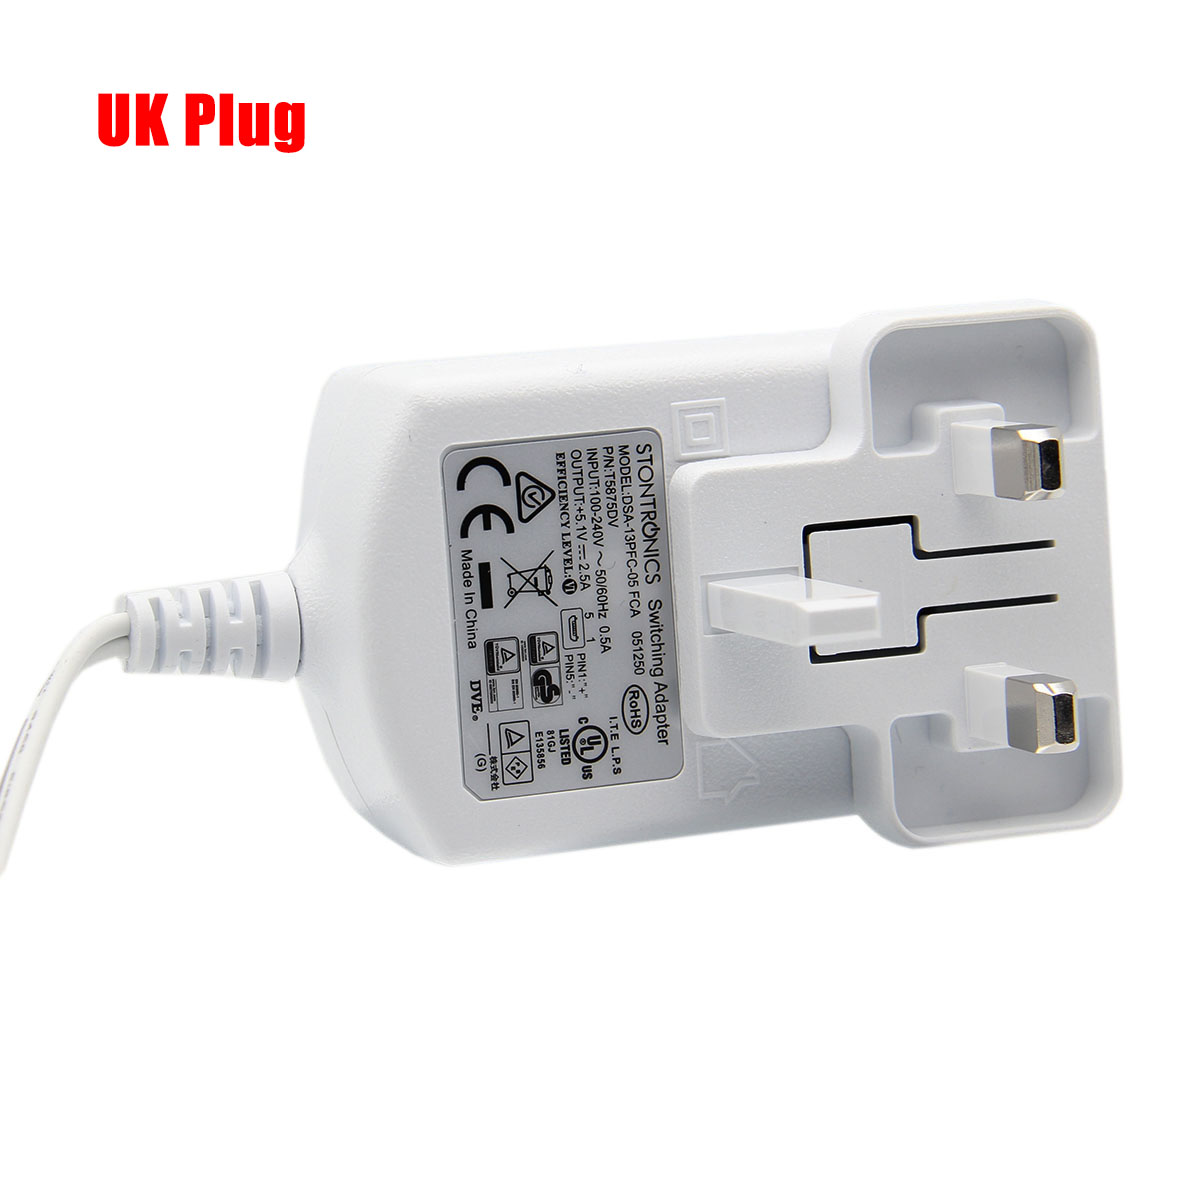 Official-Power-Supply-Charger-For-Raspberry-Pi-Cell-Phone-Tablet-With-AU-EU-UK-US-Plug-1043221